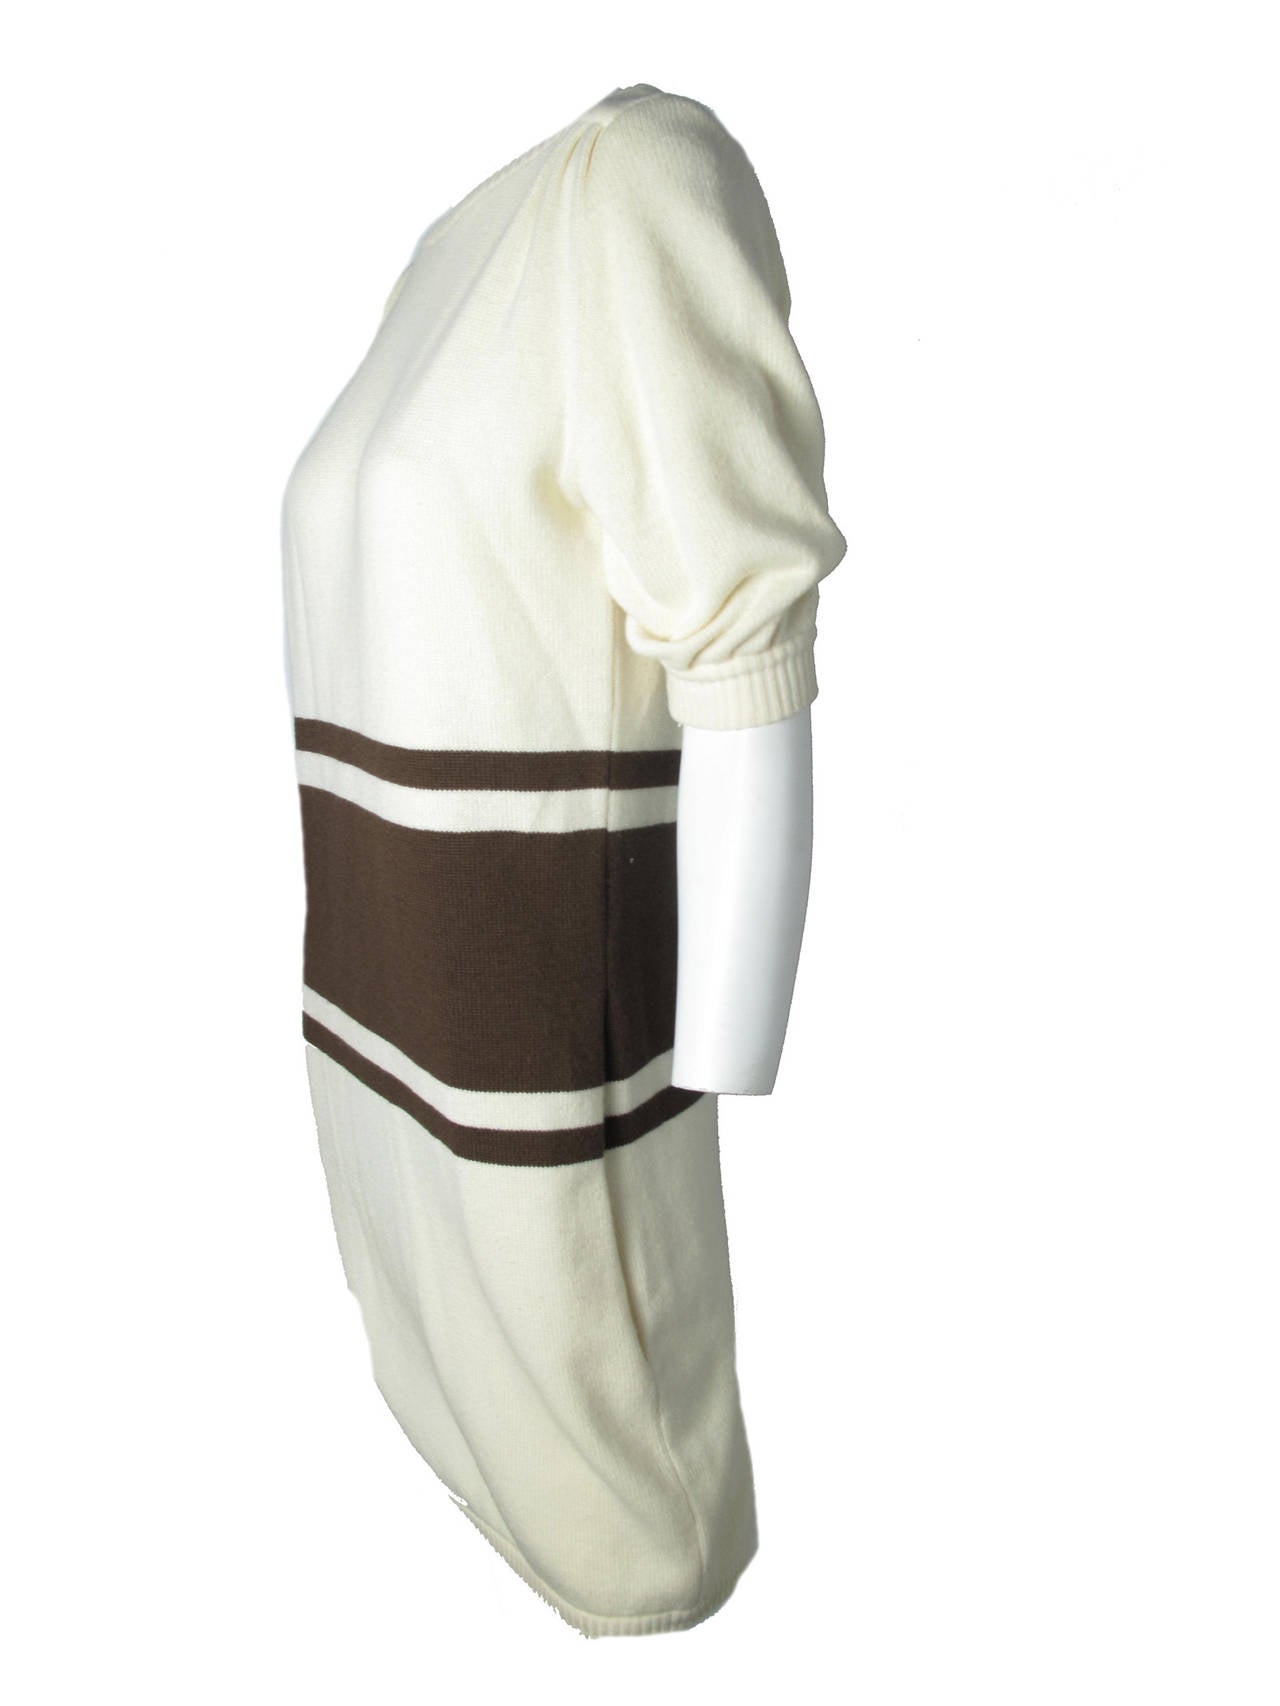 1980s Valentino creme wool dress with brown stripes and pockets. 39" bust, 35" waist, 35" hips, 13" sleeve, 34 1/2" length.  Made in Italy. Condition: Excellent. Size Med/ Large